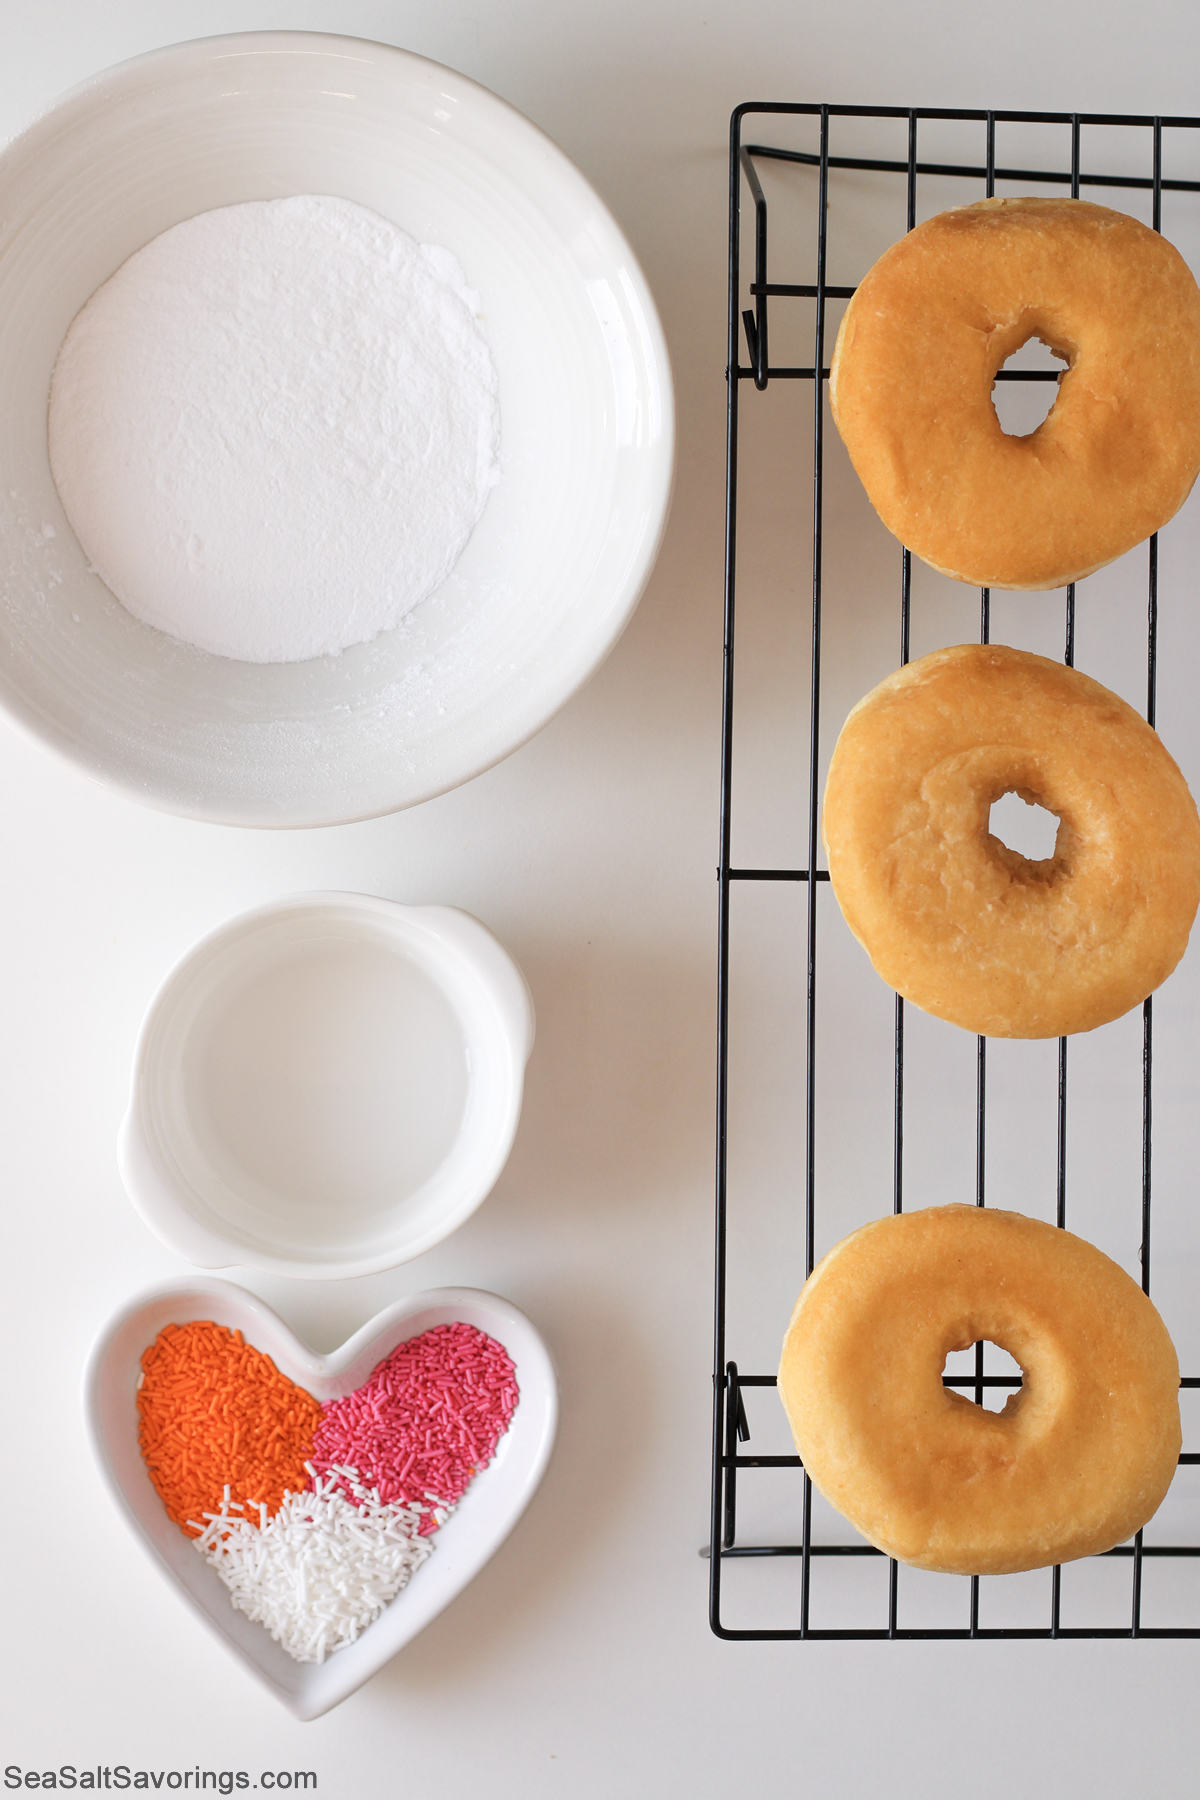 cooked plain donuts on a drying rack next to ingredients